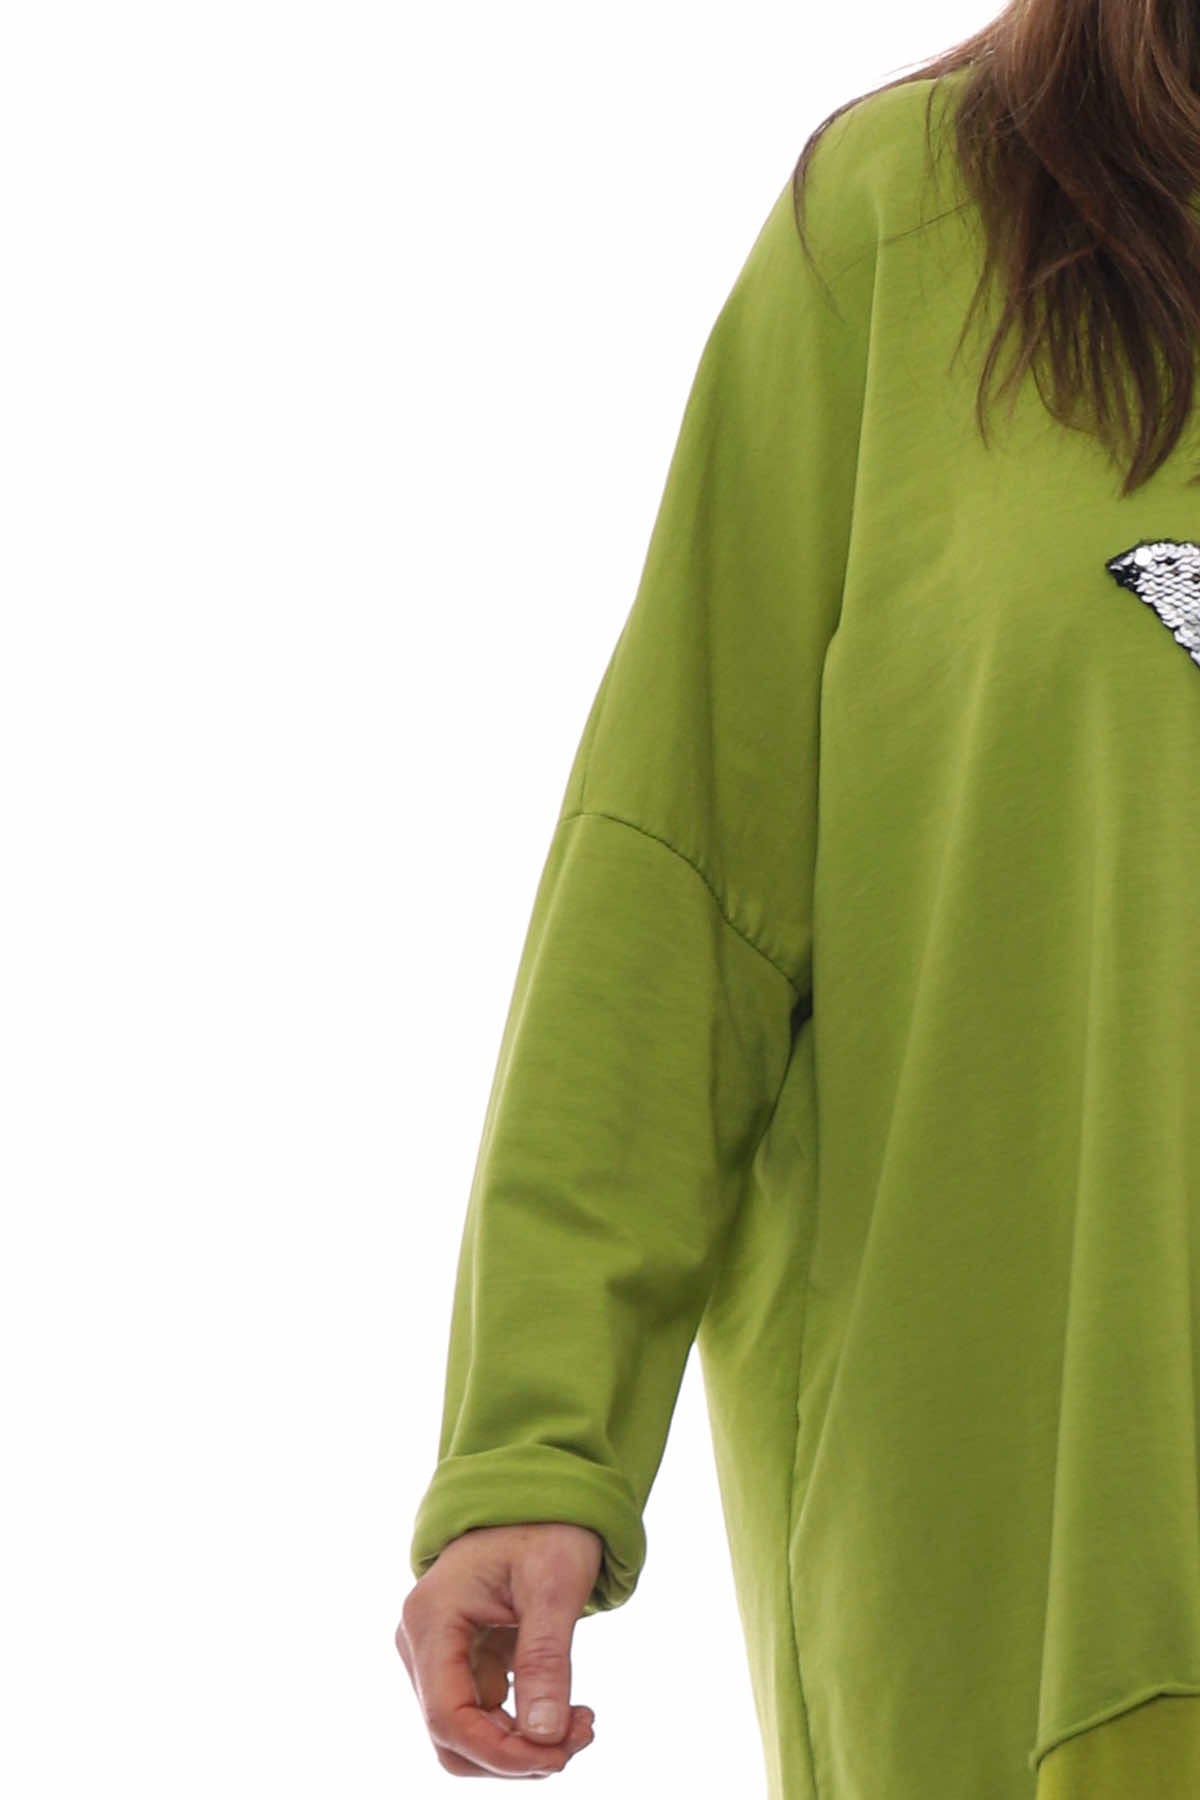 Selsey Sequin Star Cotton Top Lime